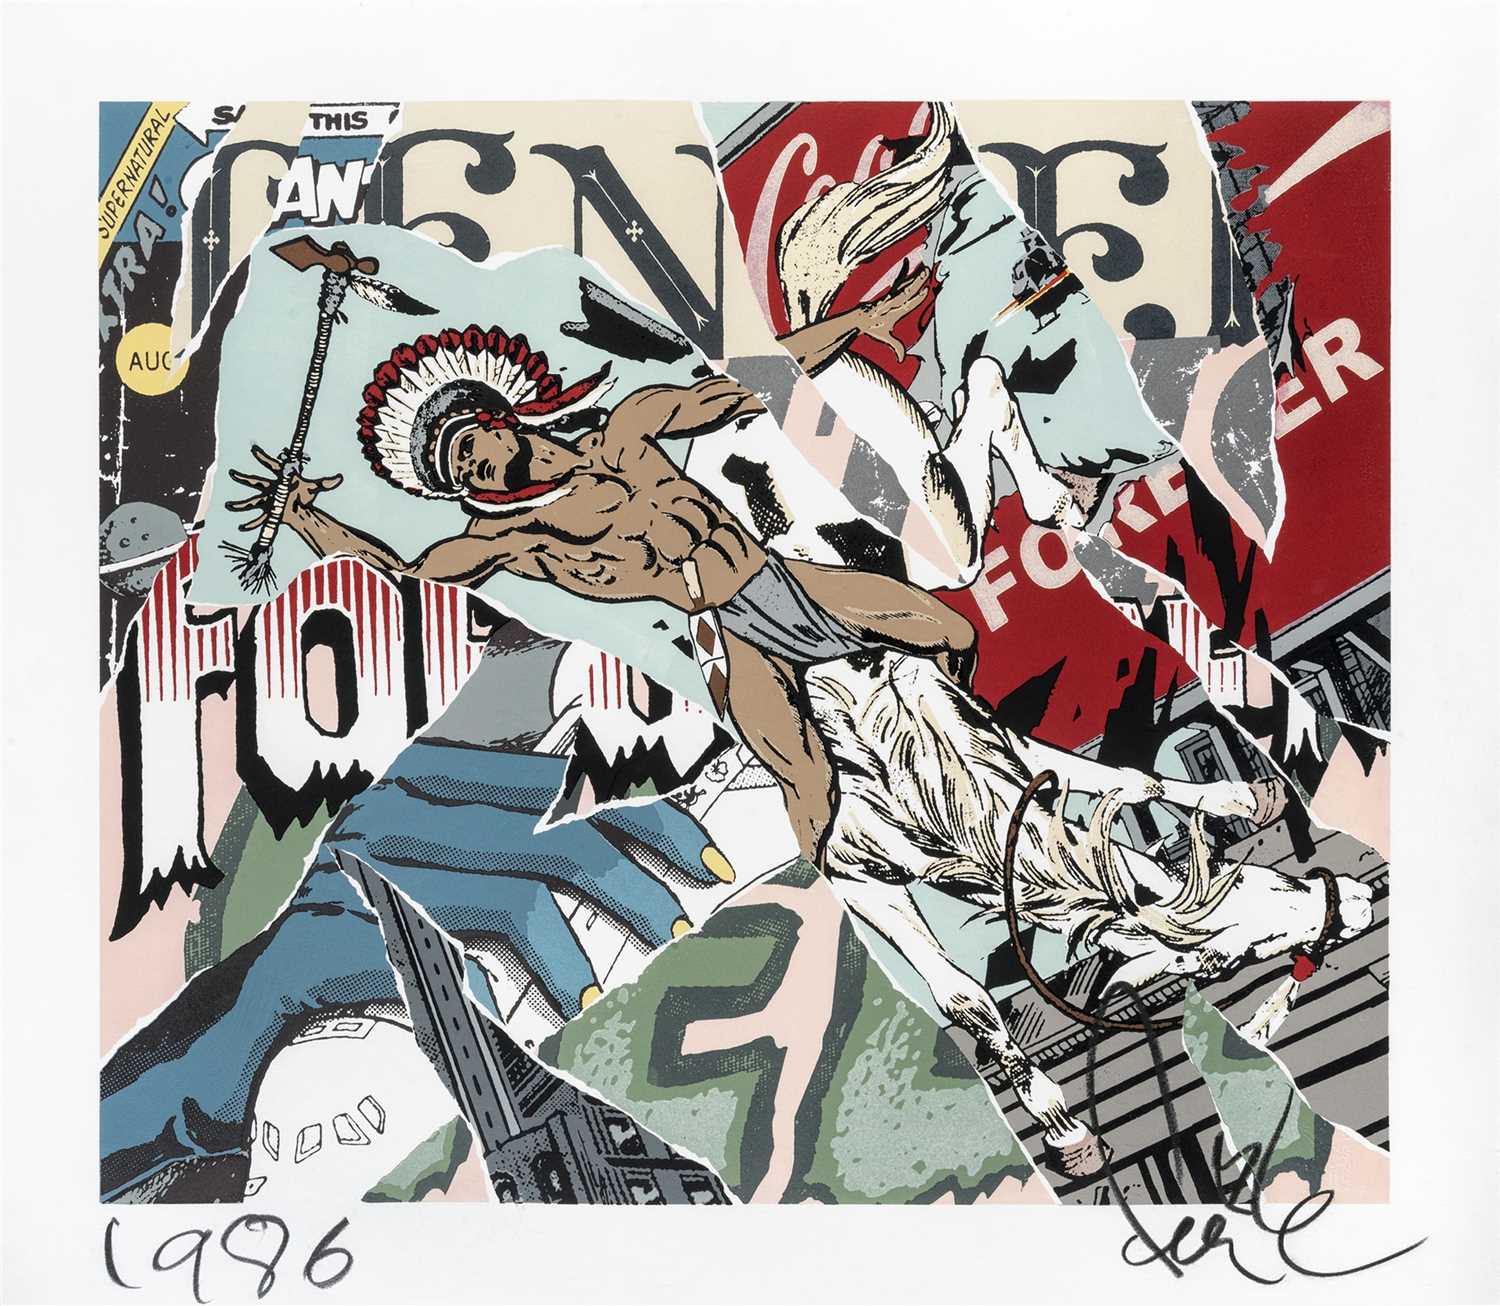 Lot 152 - Faile (Collaboration), 'Tender Forever', 2008